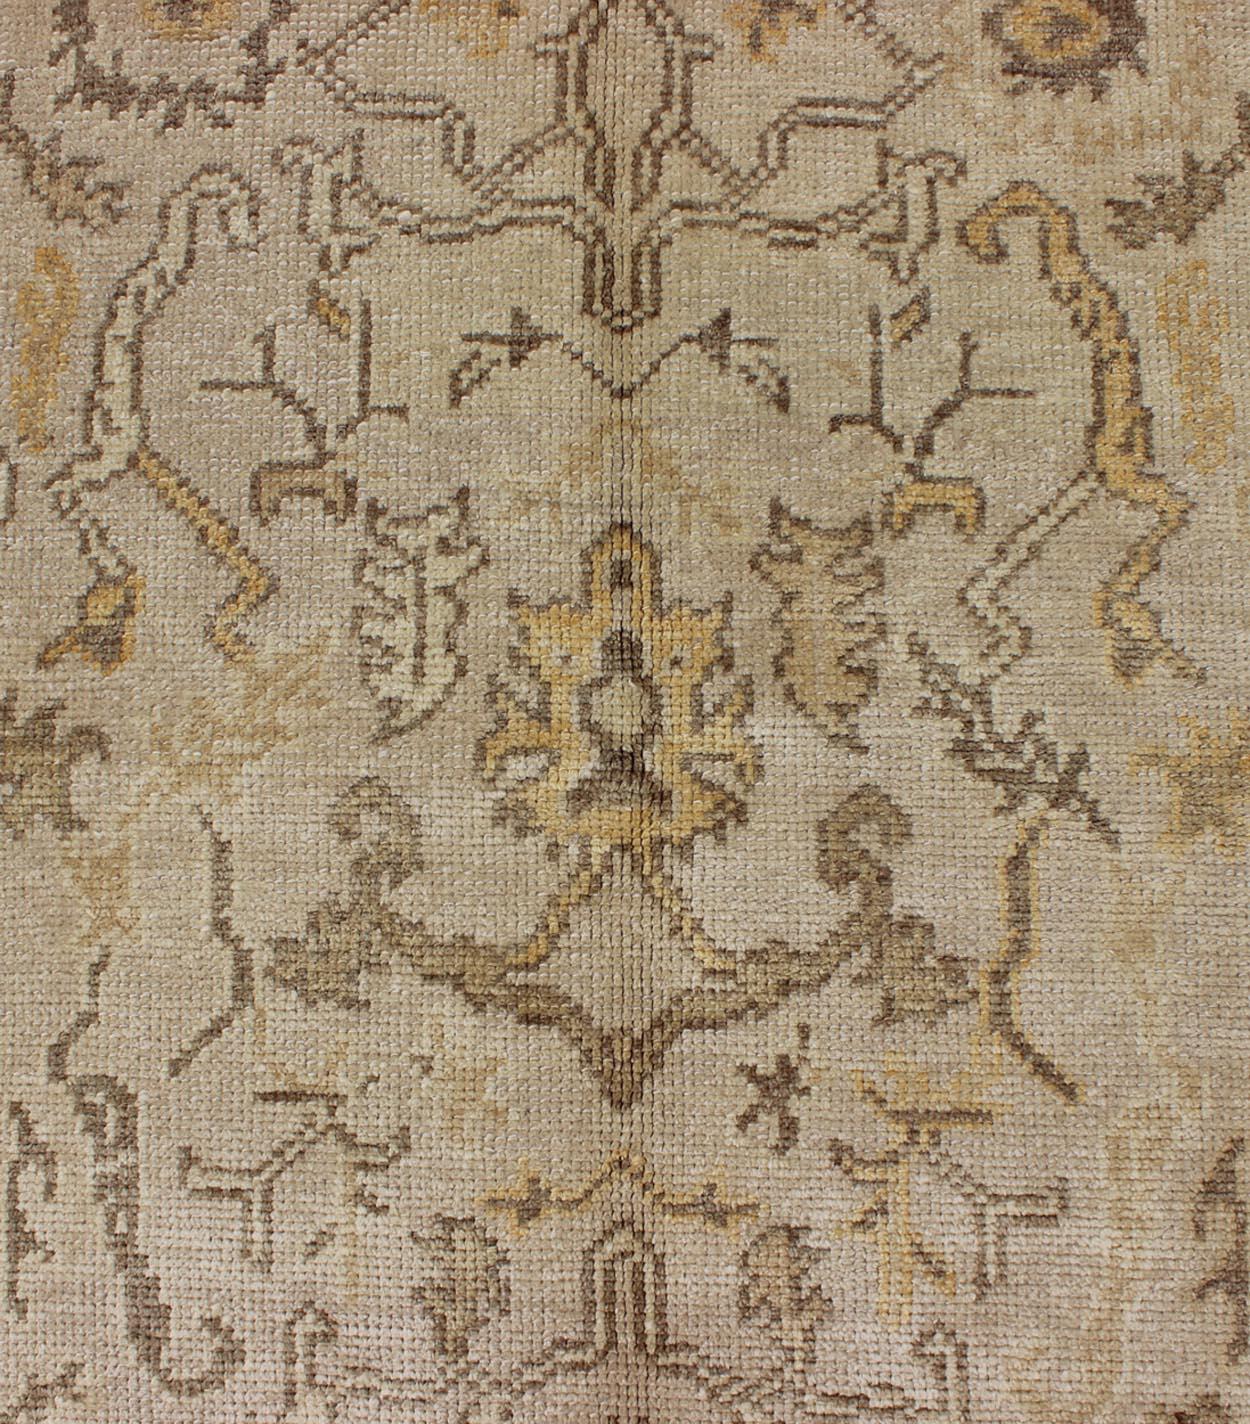 Contemporary Reproduction Turkish Oushak Rug with Stylized Floral Design in Earth Tone Colors For Sale